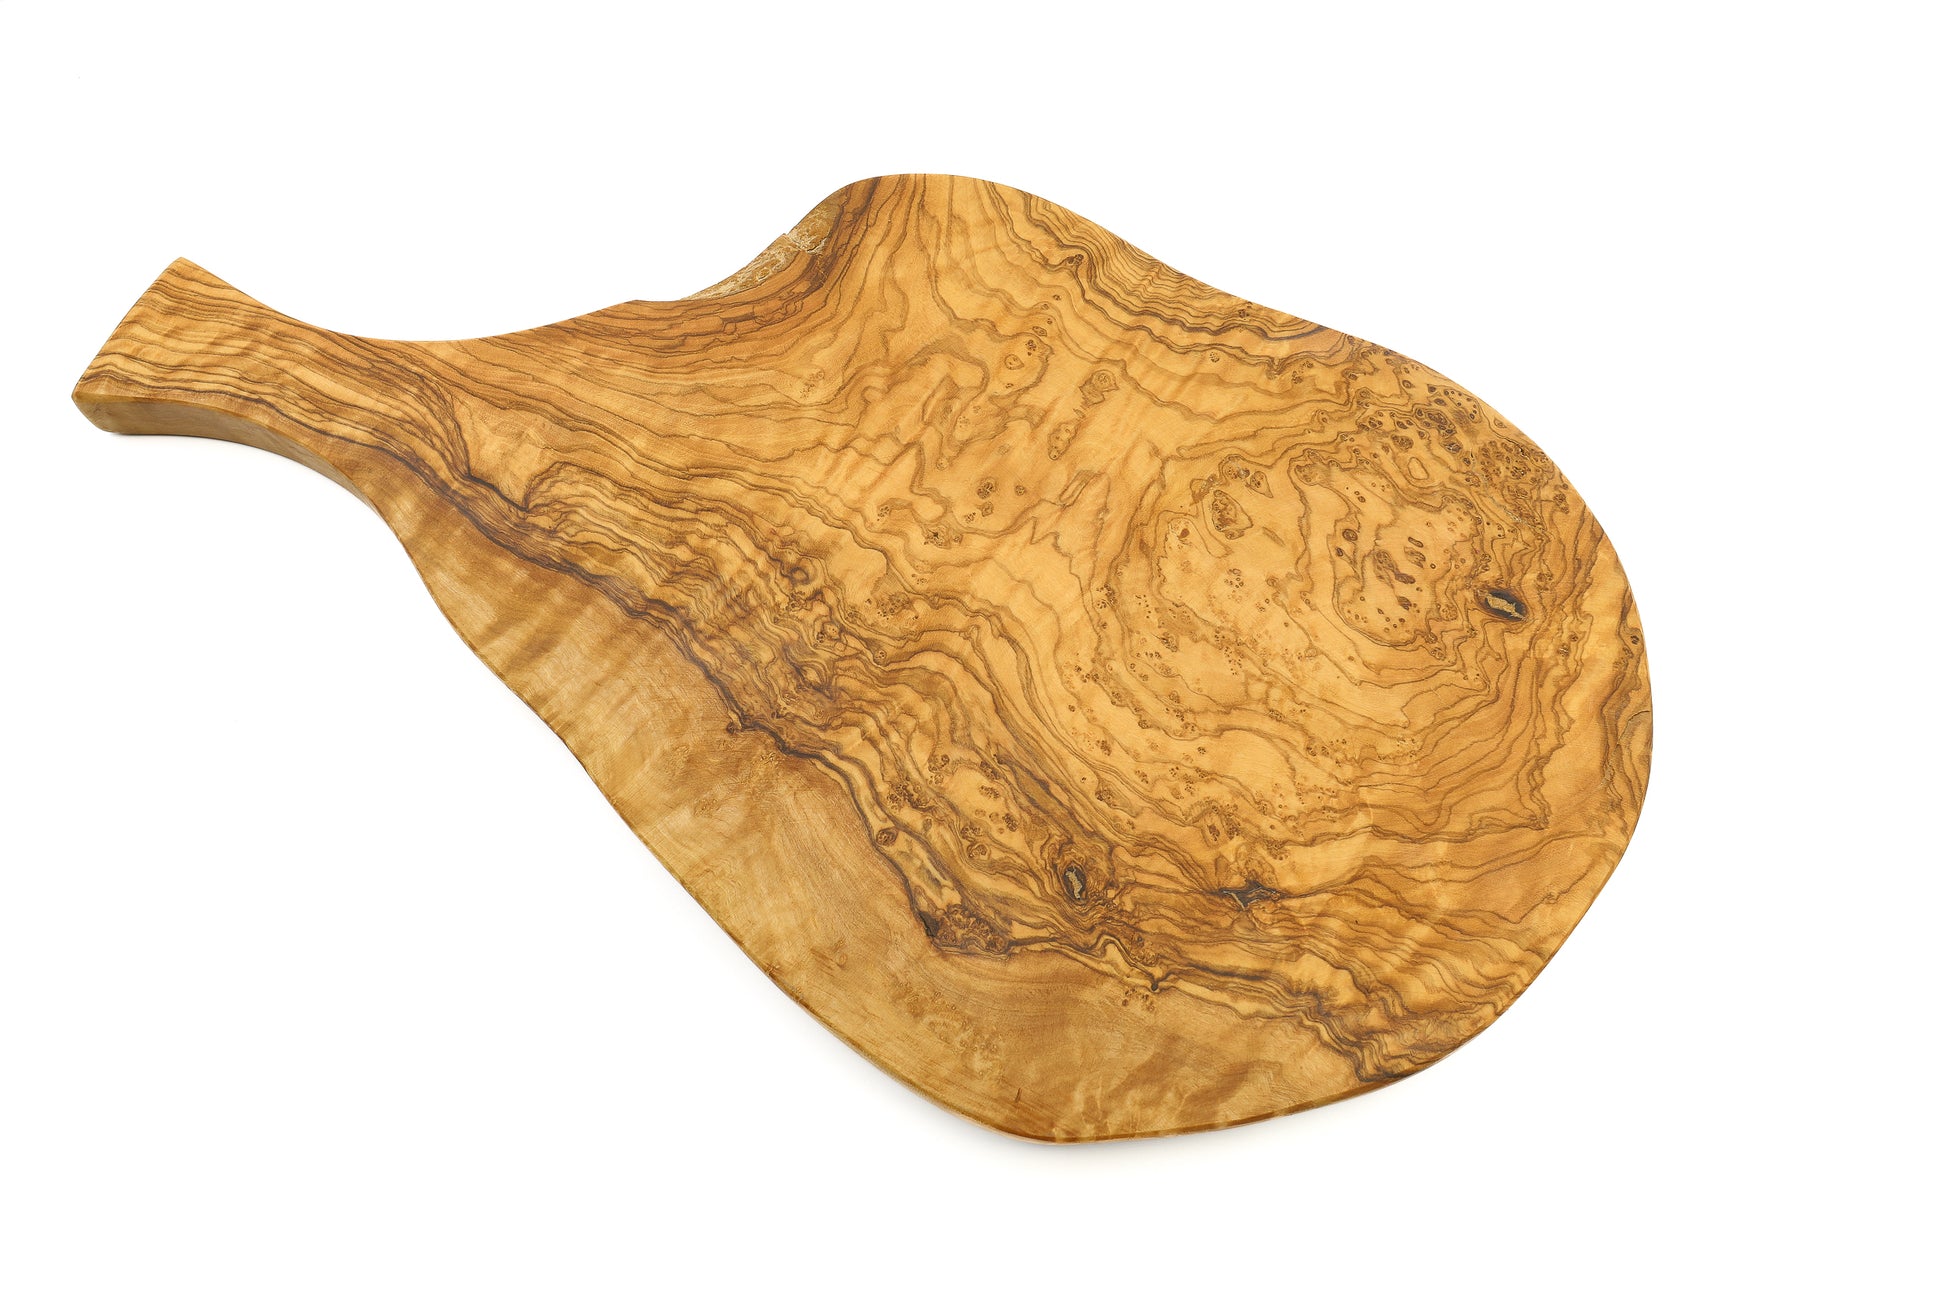 Rustic olive wood cutting board with an irregular, handcrafted design resembling a beef thigh, and a handle for easy use